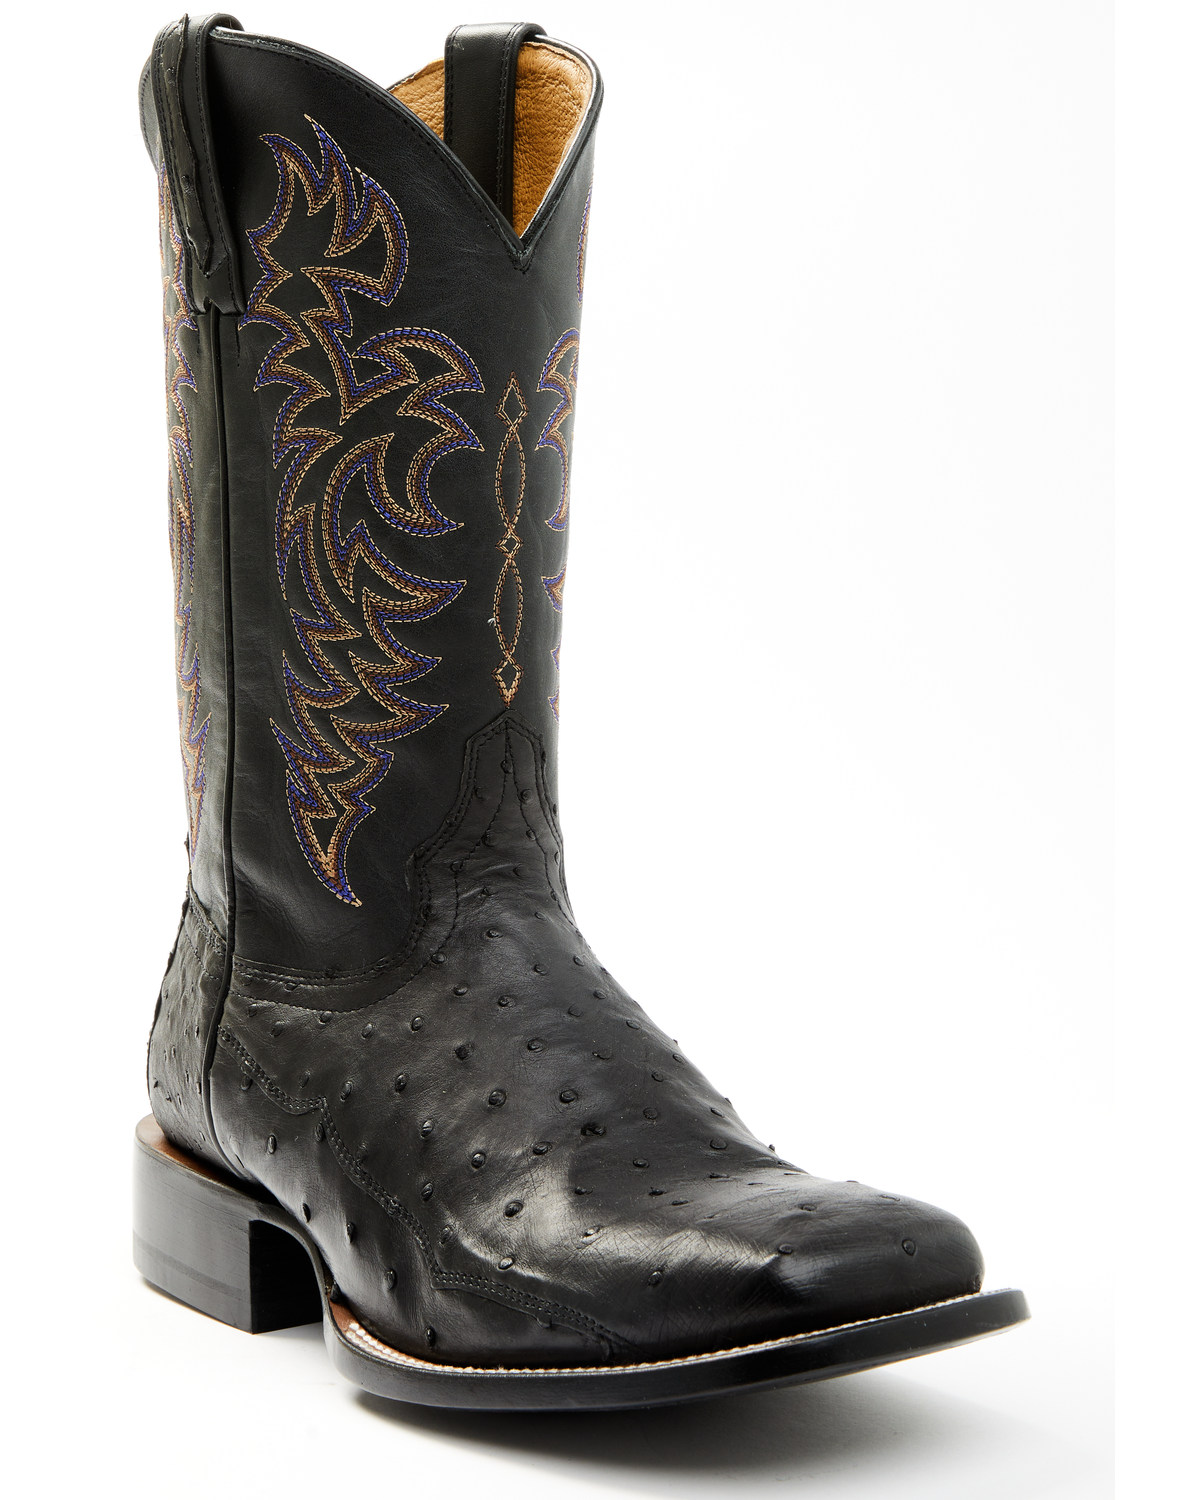 Cody James Men's Exotic Full-Quill Ostrich Western Boots